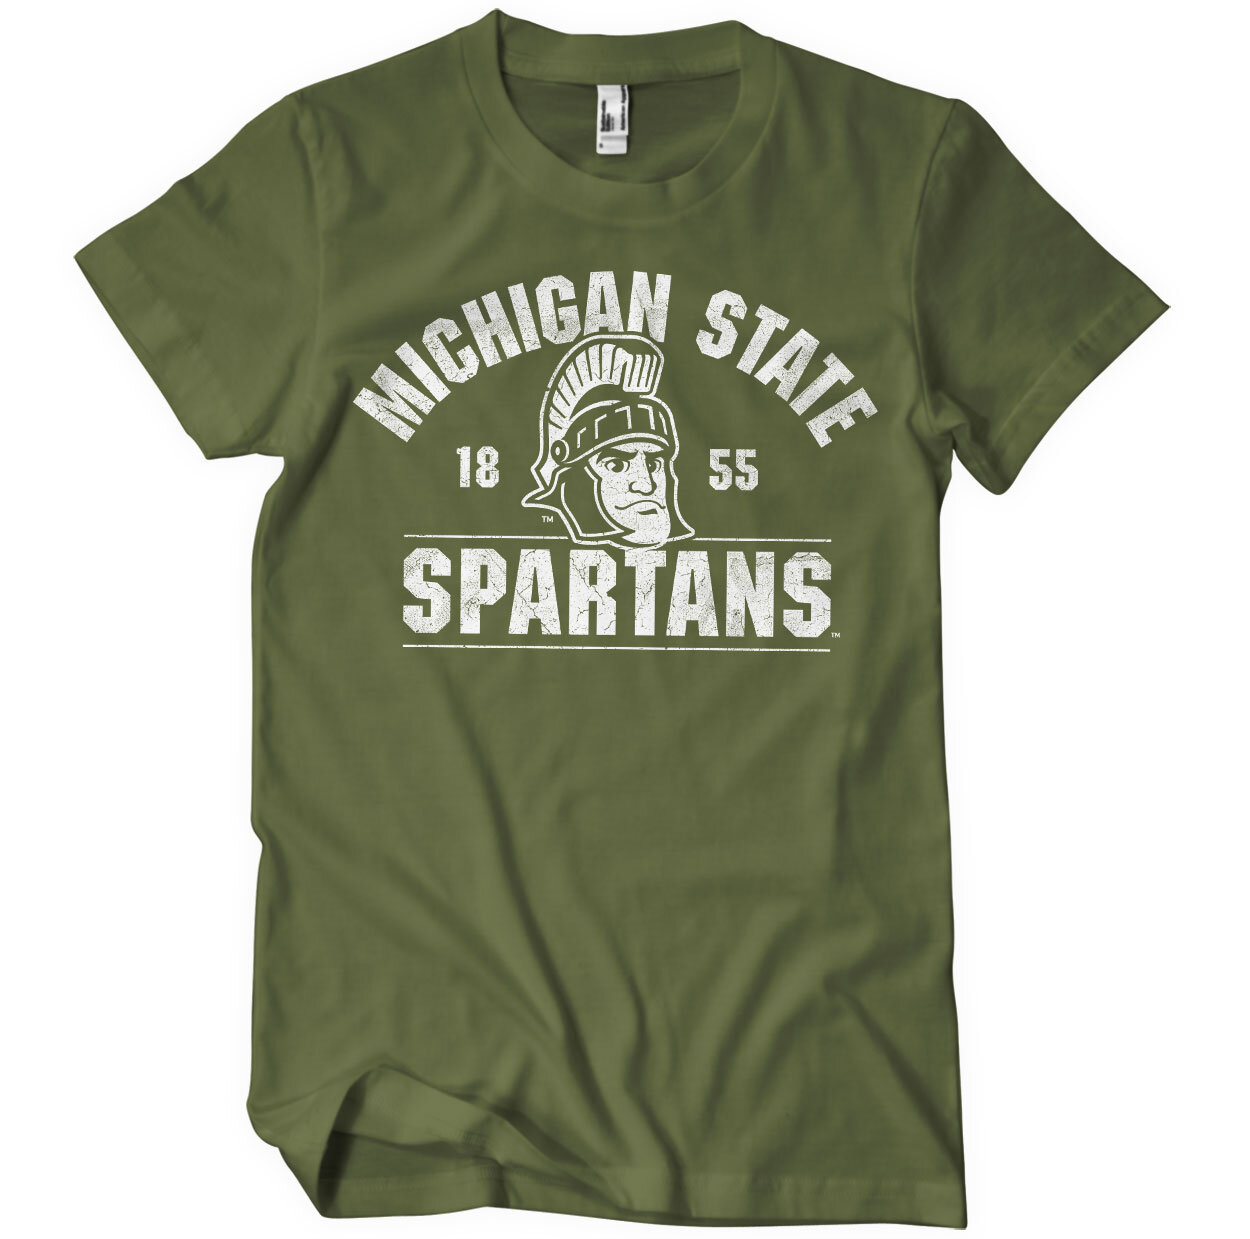 Michigan State Spartans 1855 T-Shirt